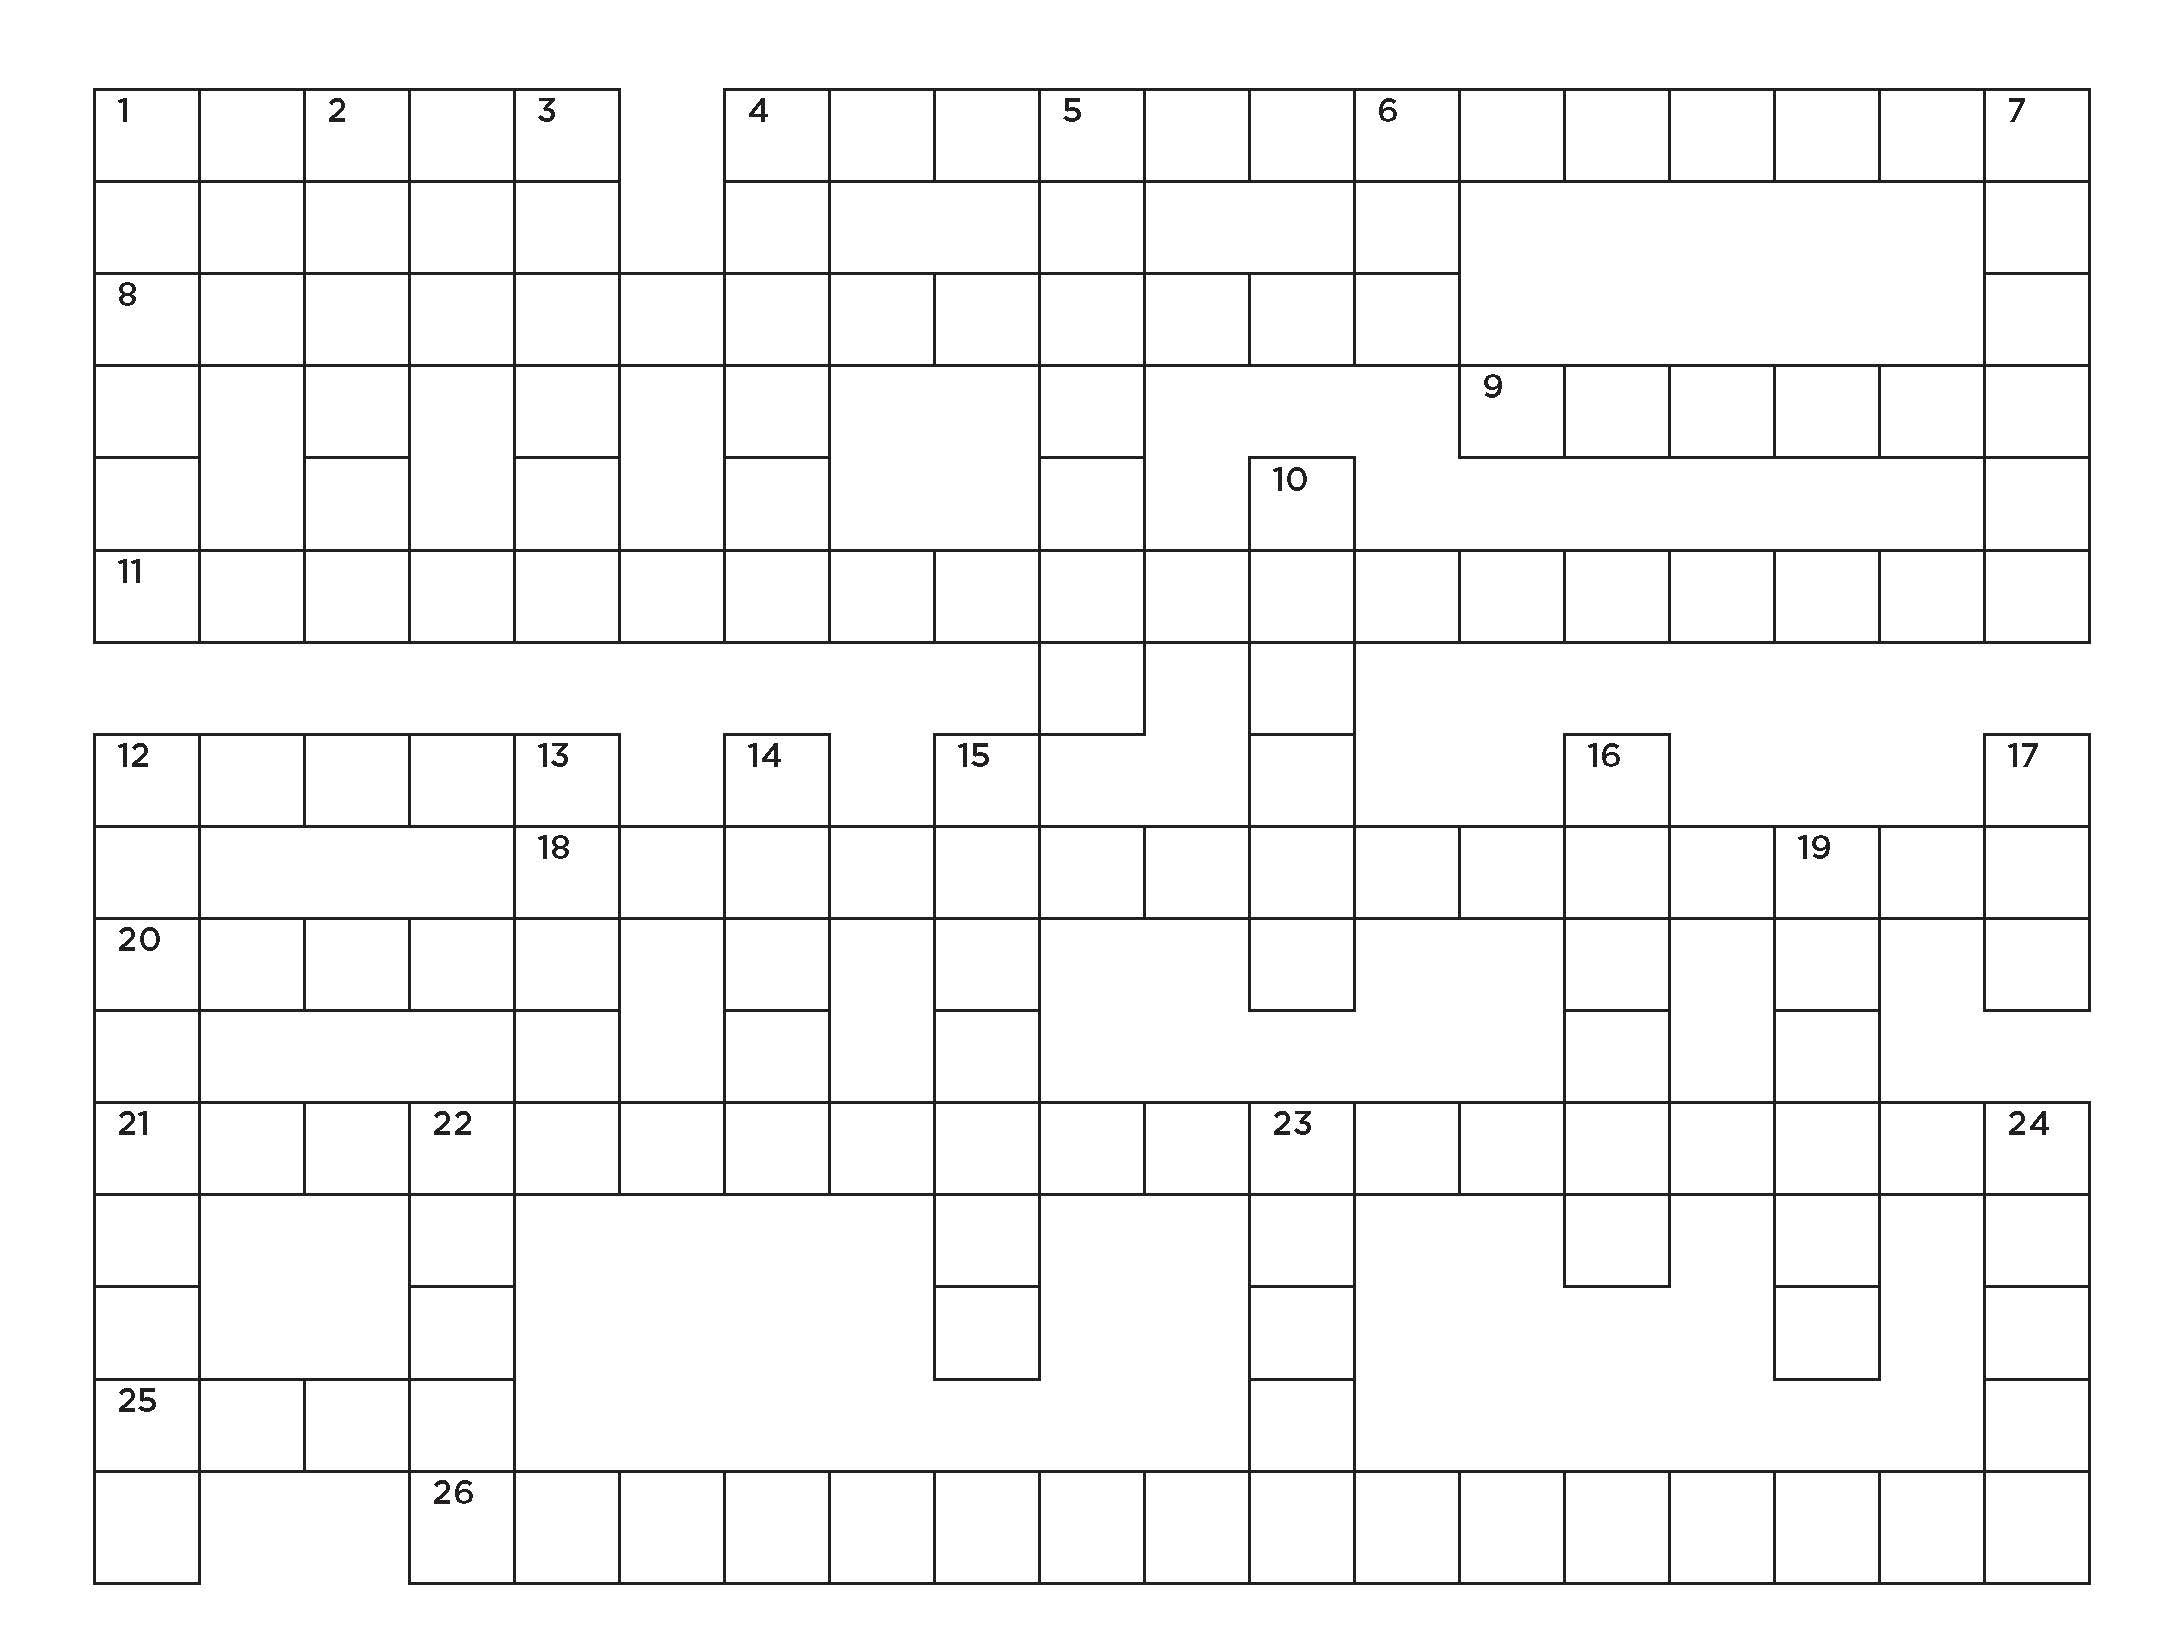 a cross-word grid with 26 clues across and 24 clues down